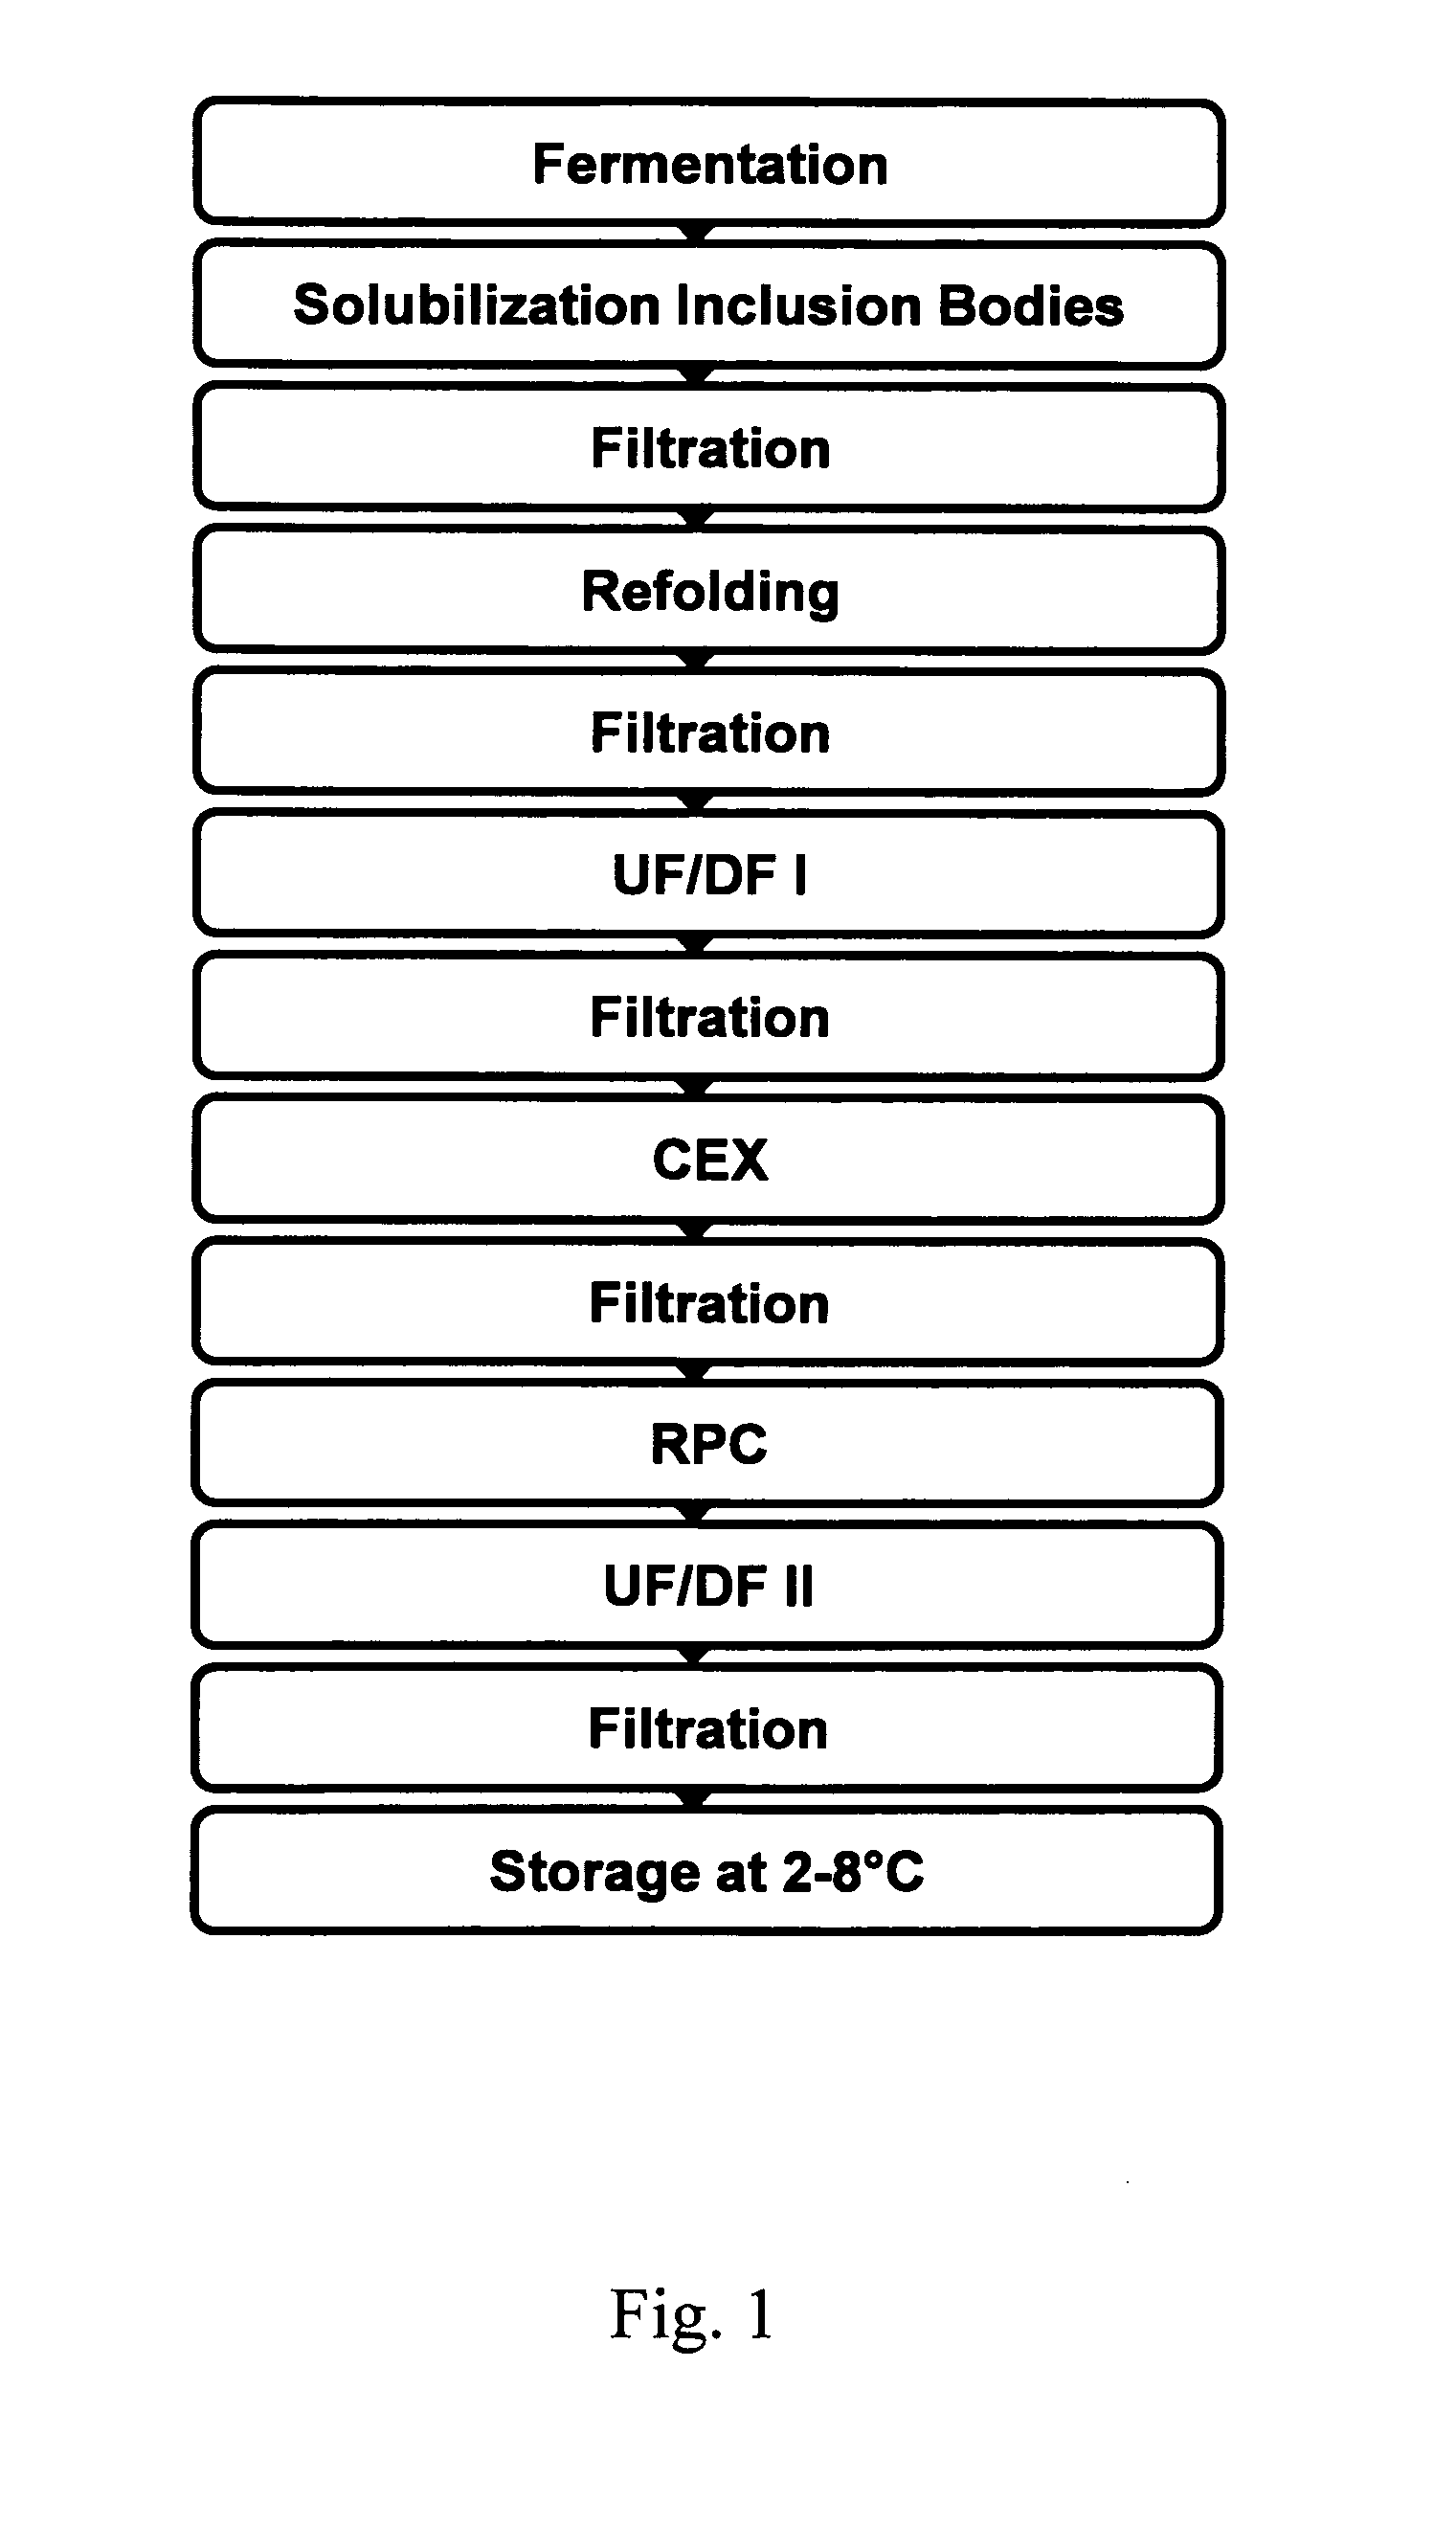 Method for obtaining biologically active recombinant human g-csf